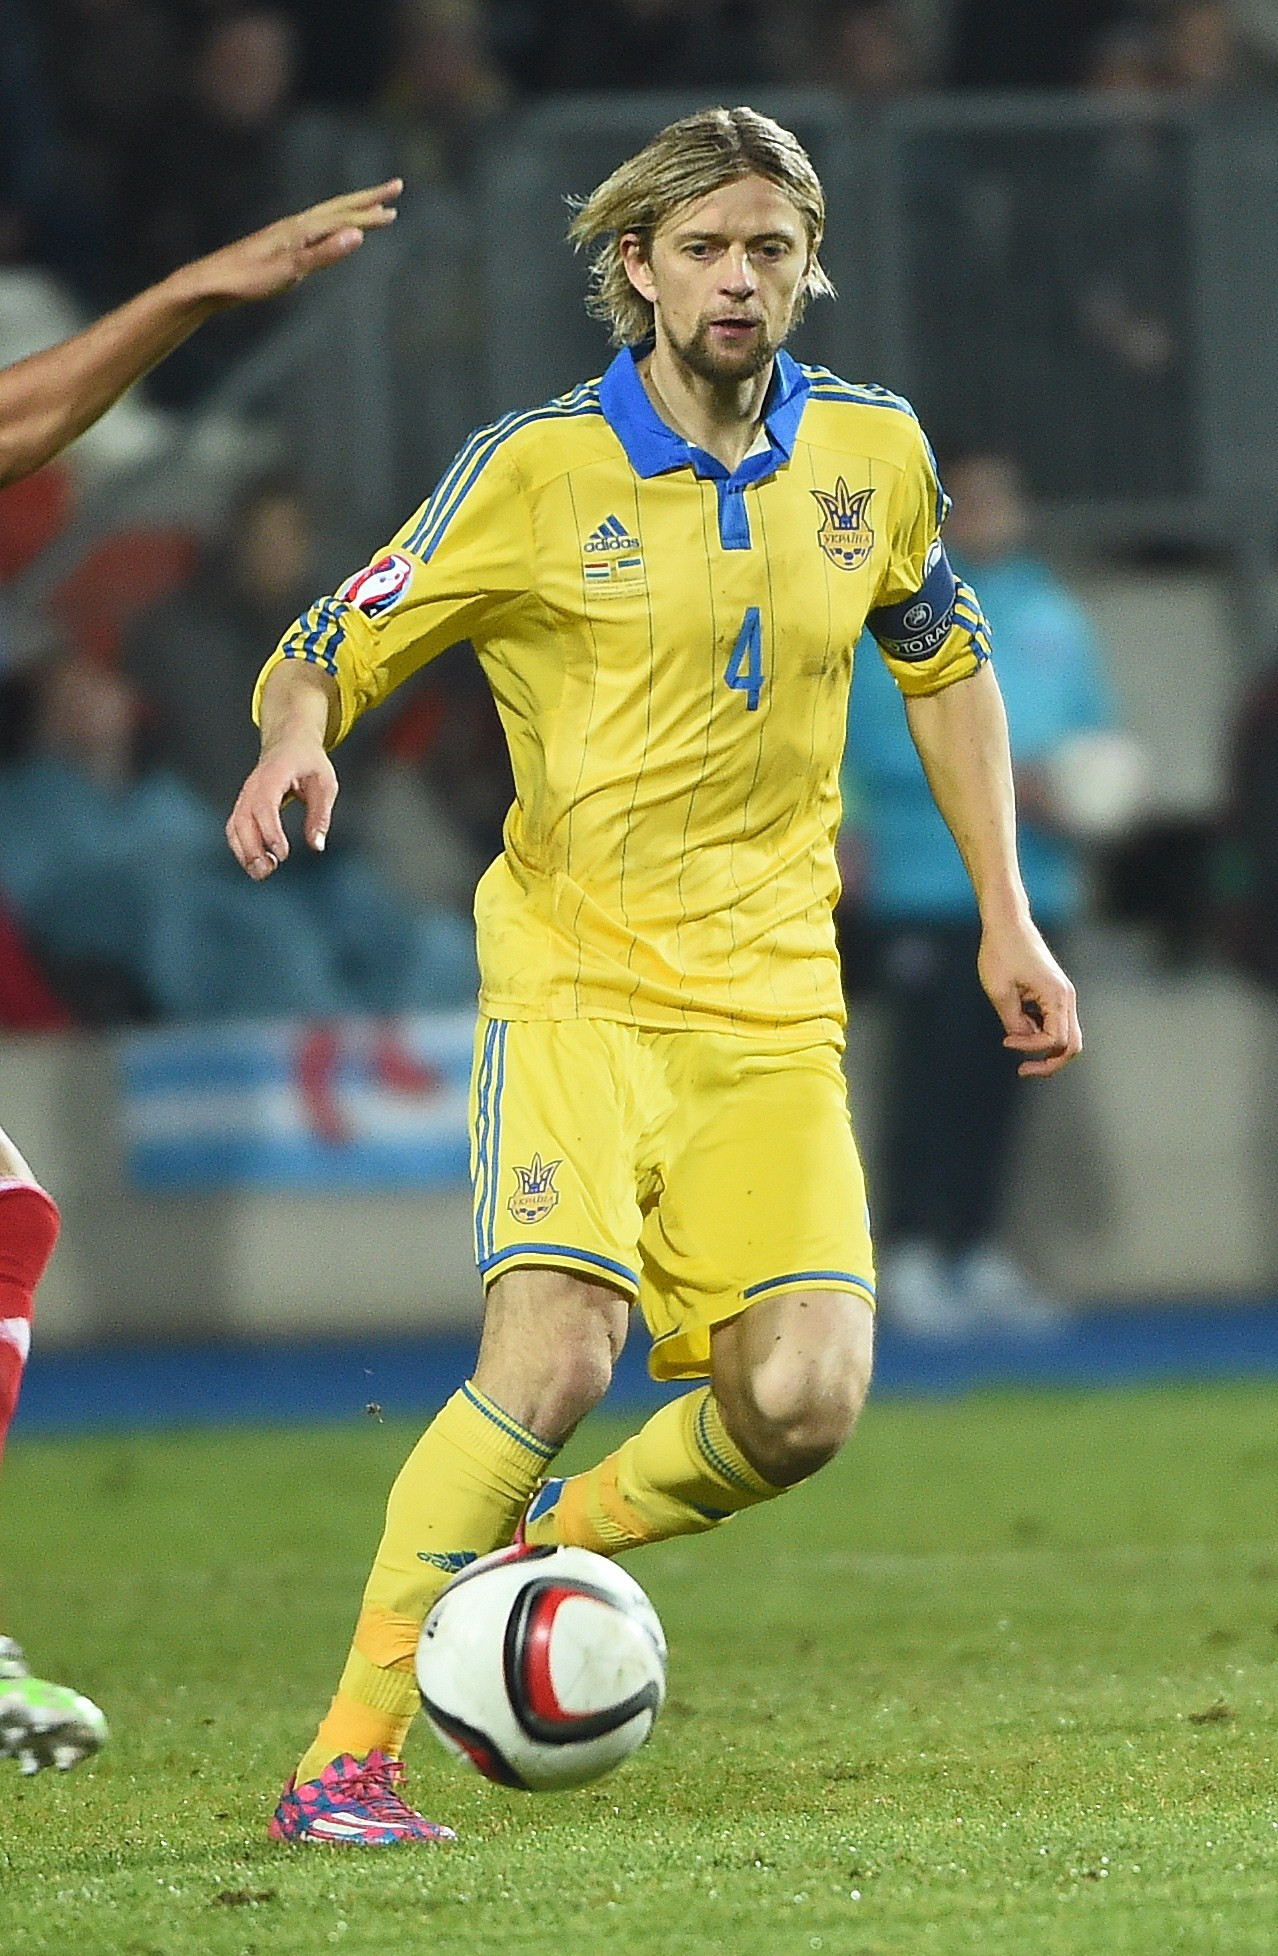 Anatoliy Tymoschuk, capped 144 times, is one of Ukraine's most successful footballers ©Getty Images